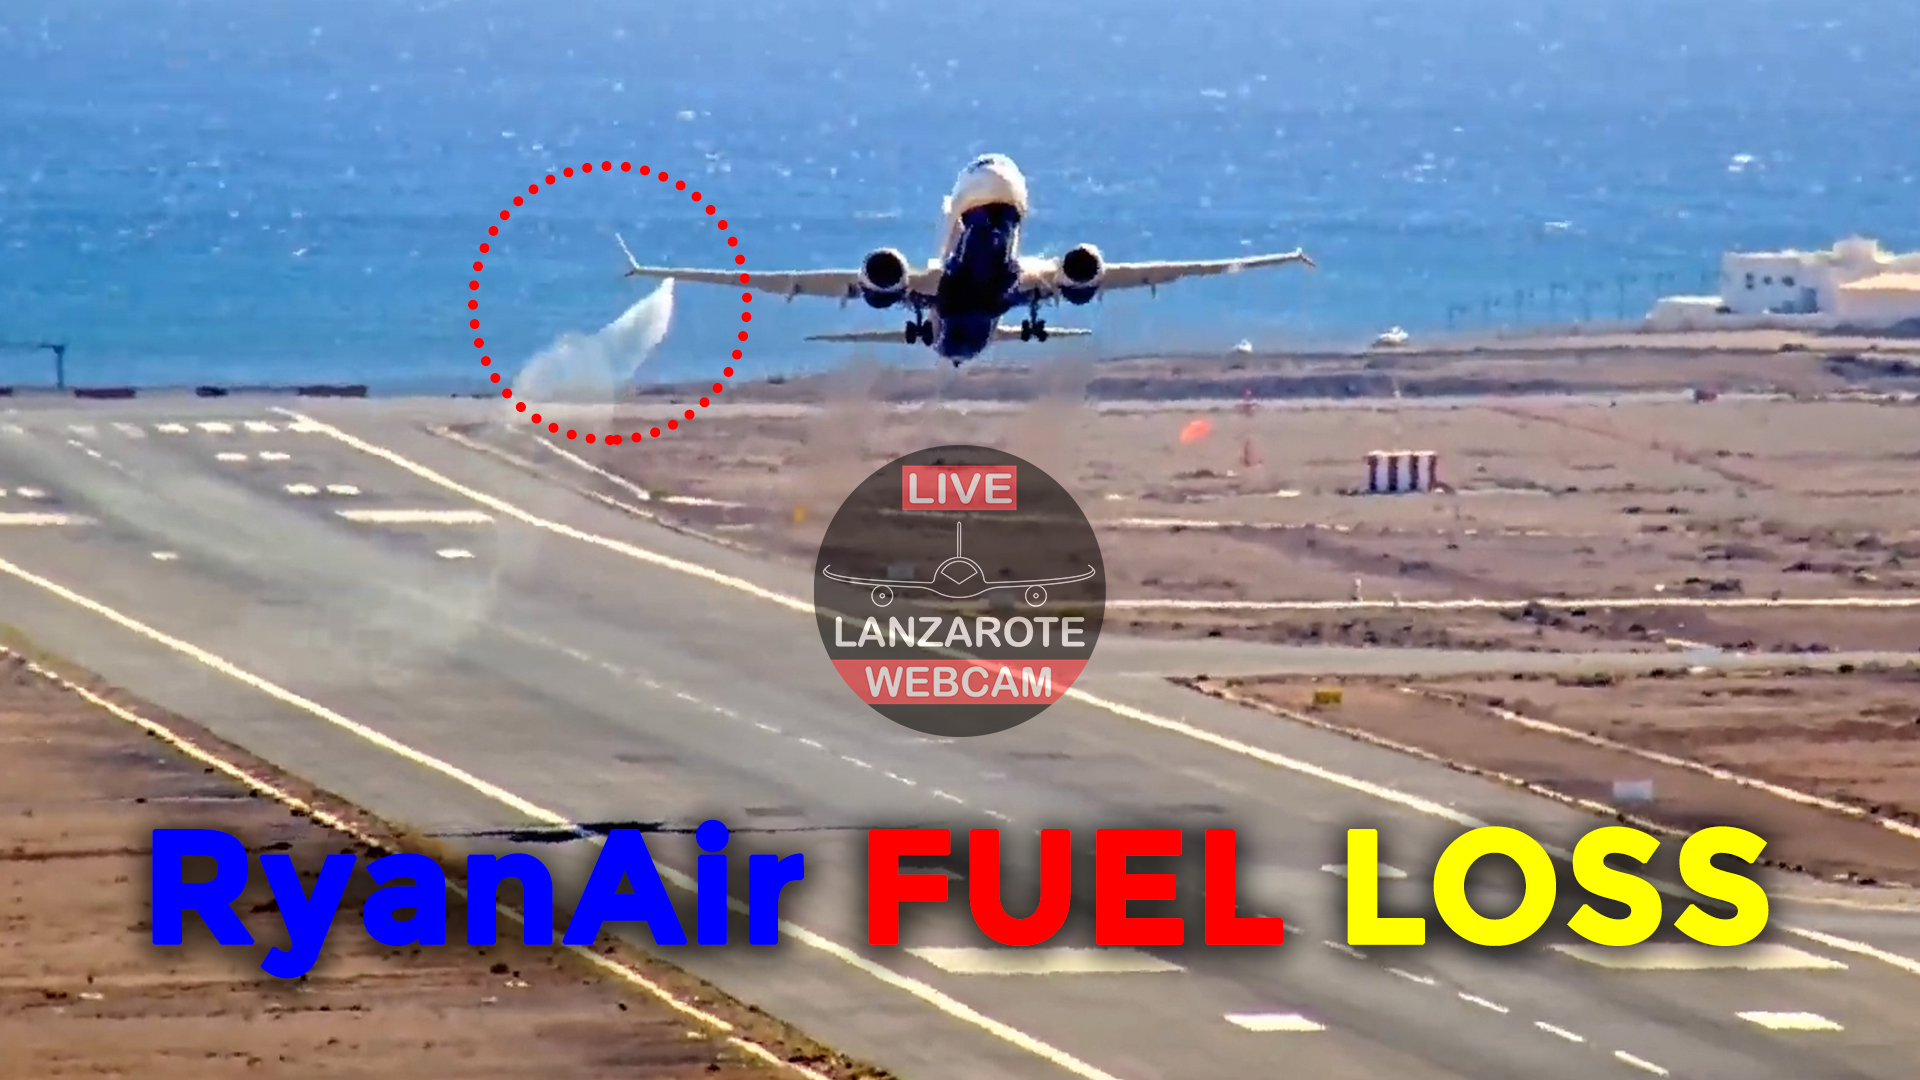 Ryanair taking off with a fuel loss